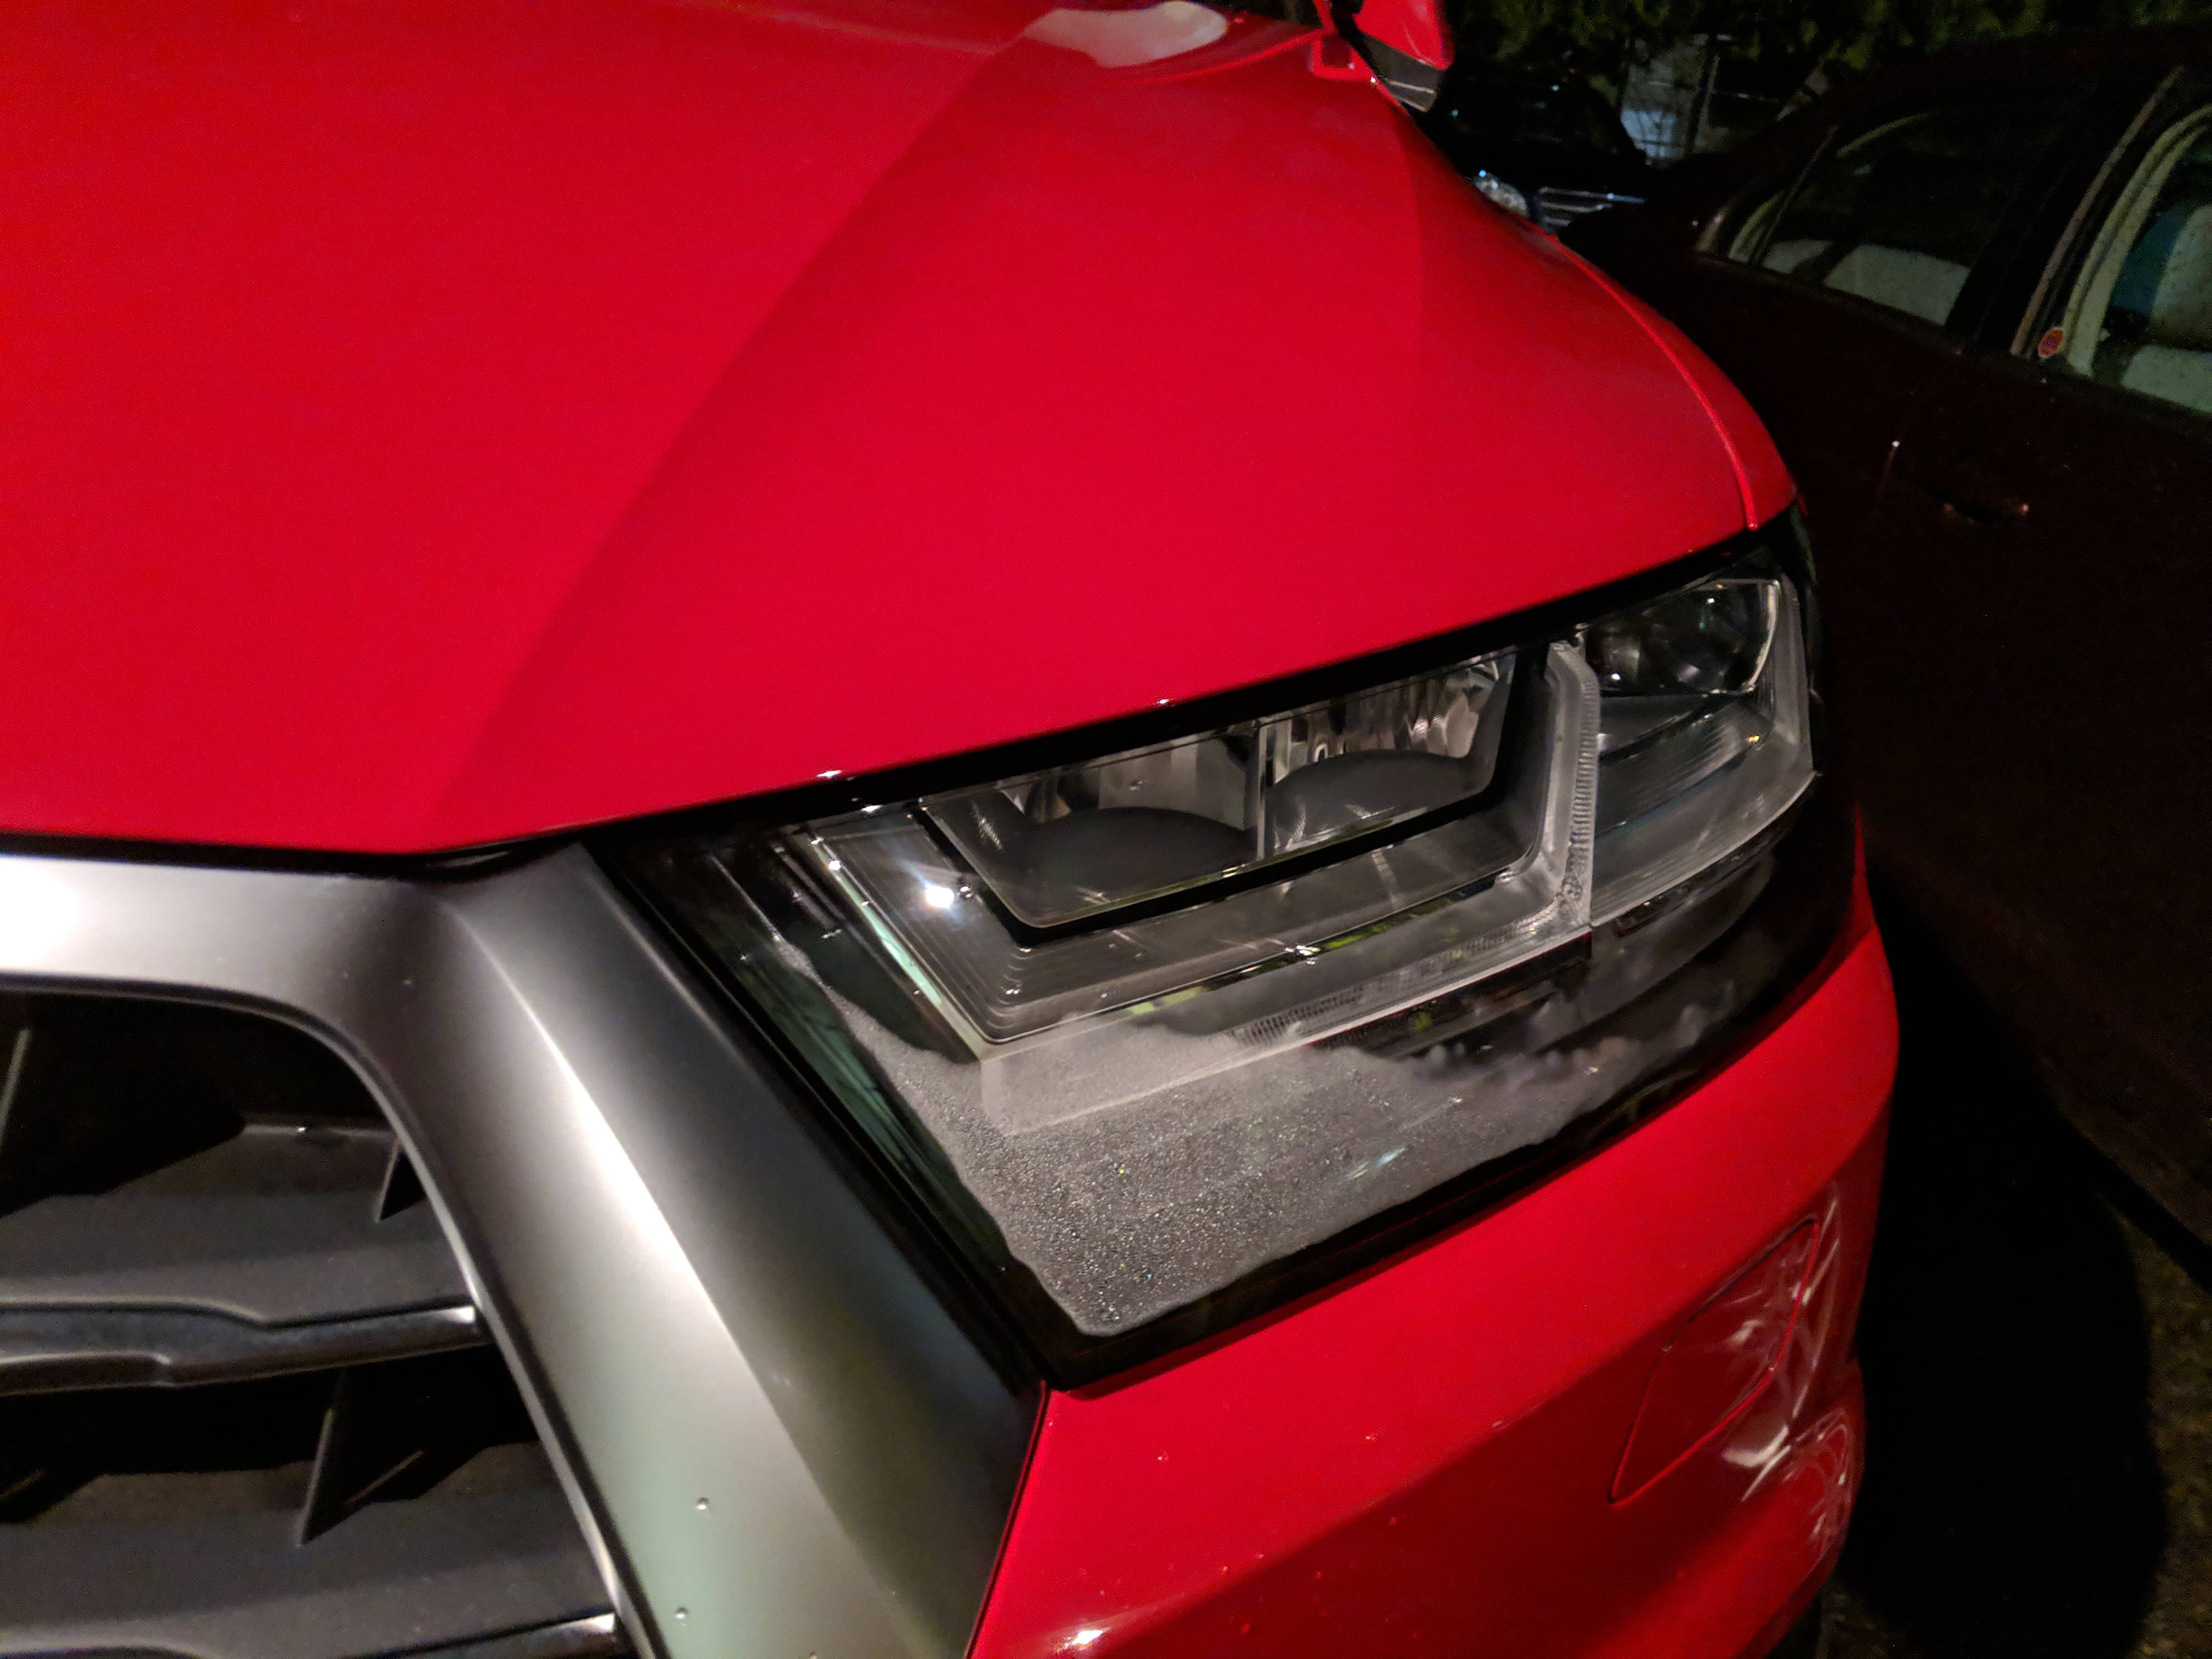 Headlamp Condensation issue with new car - AudiWorld